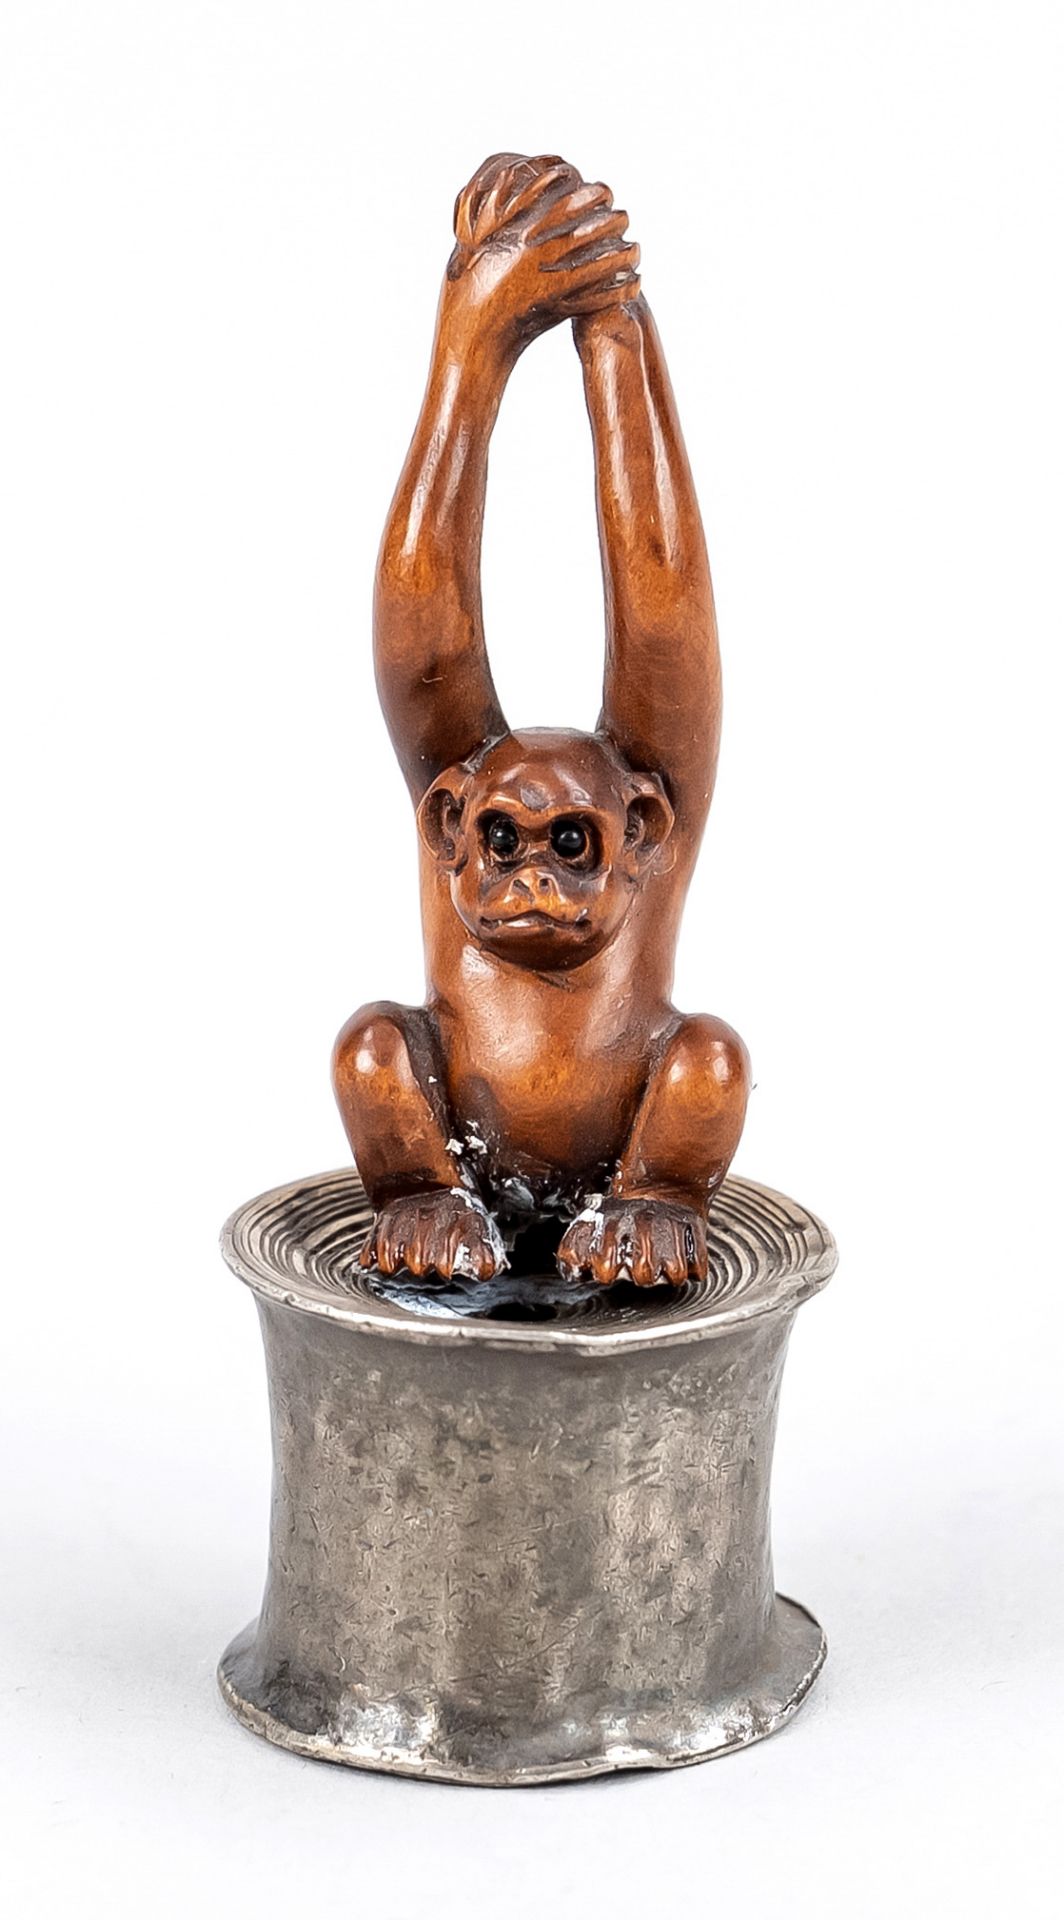 Netsuke of a monkey, Japan, probably Edo period(1603-1868) 18th/19th c., boxwood carved in the